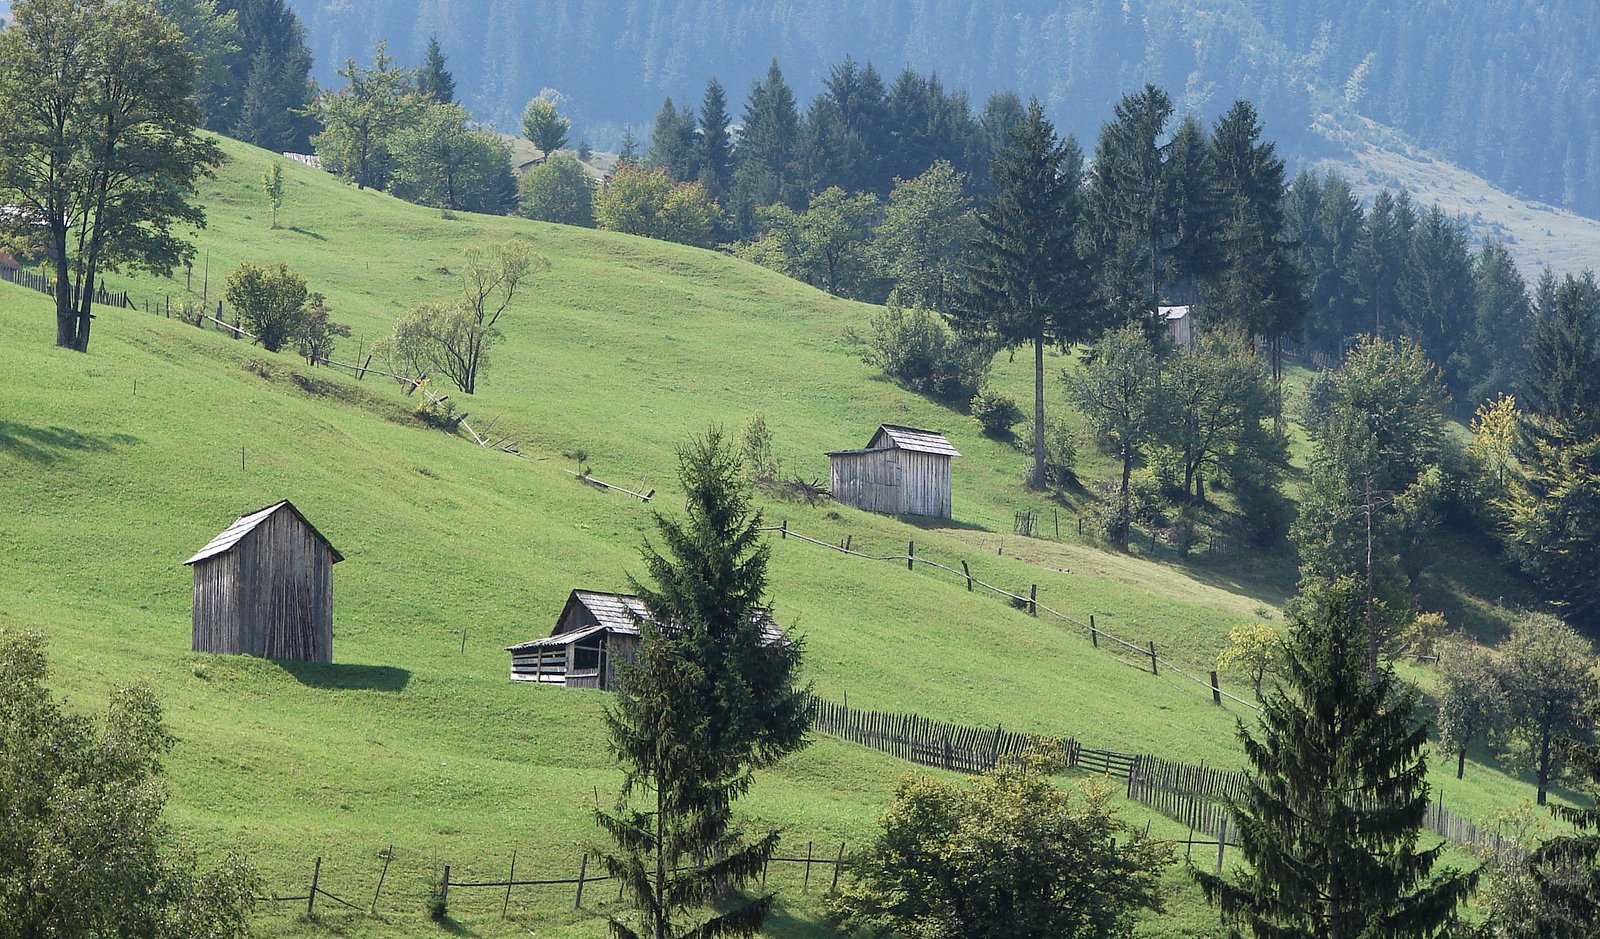 the grass covered hill has small cabins on it